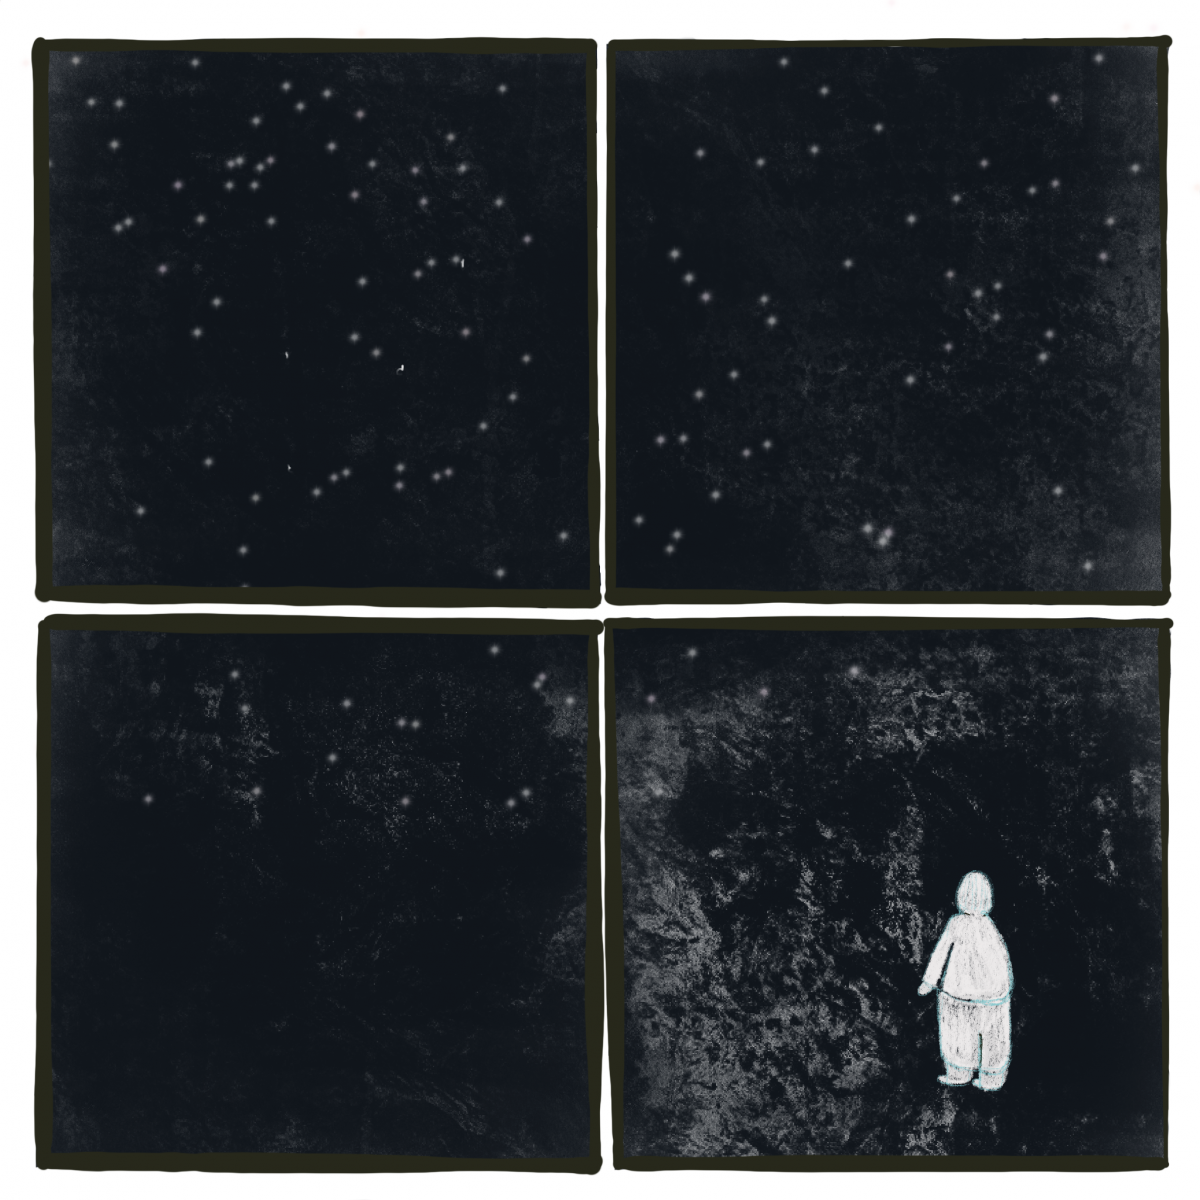 Illustration of four square frames filled with a dark, starry background, and a lone figure's white silhouette at the bottom right.